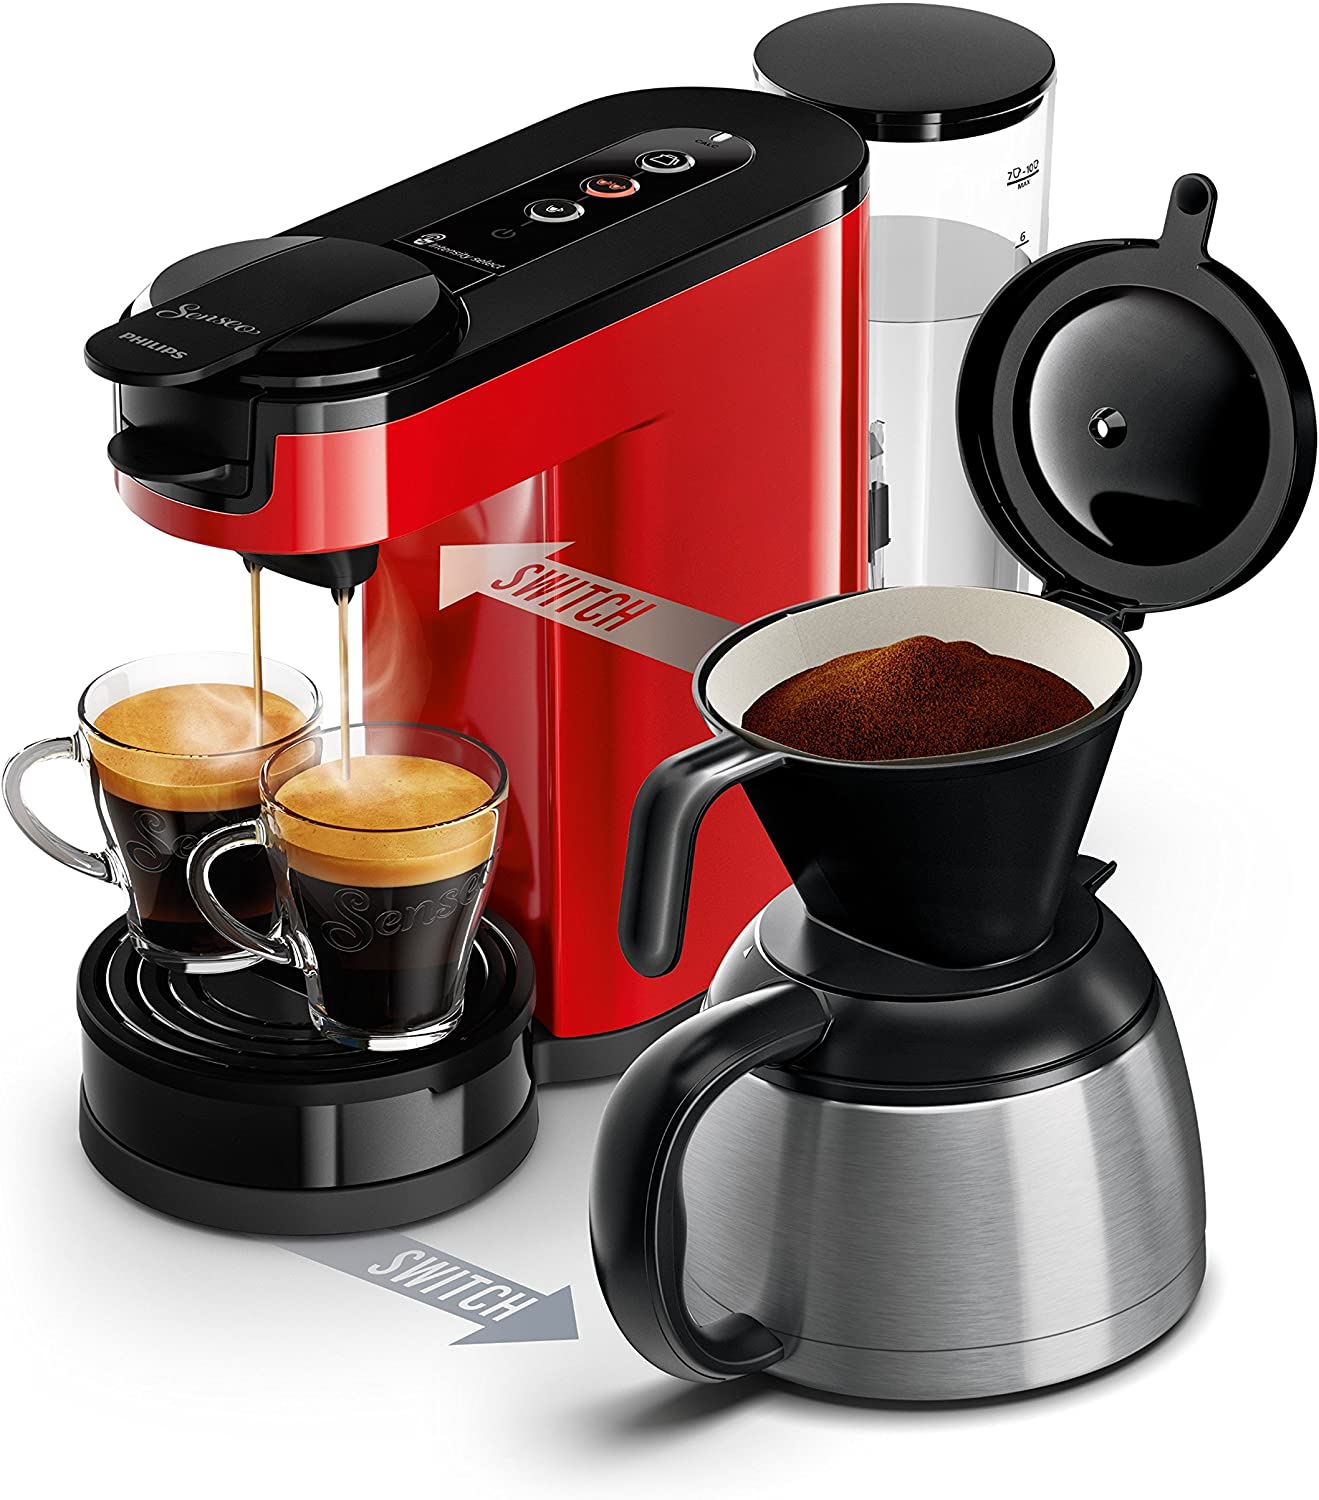 Philips Domestic Appliances Philips Senseo Switch 2-in-1 Coffee Machine Senseo Switch Red